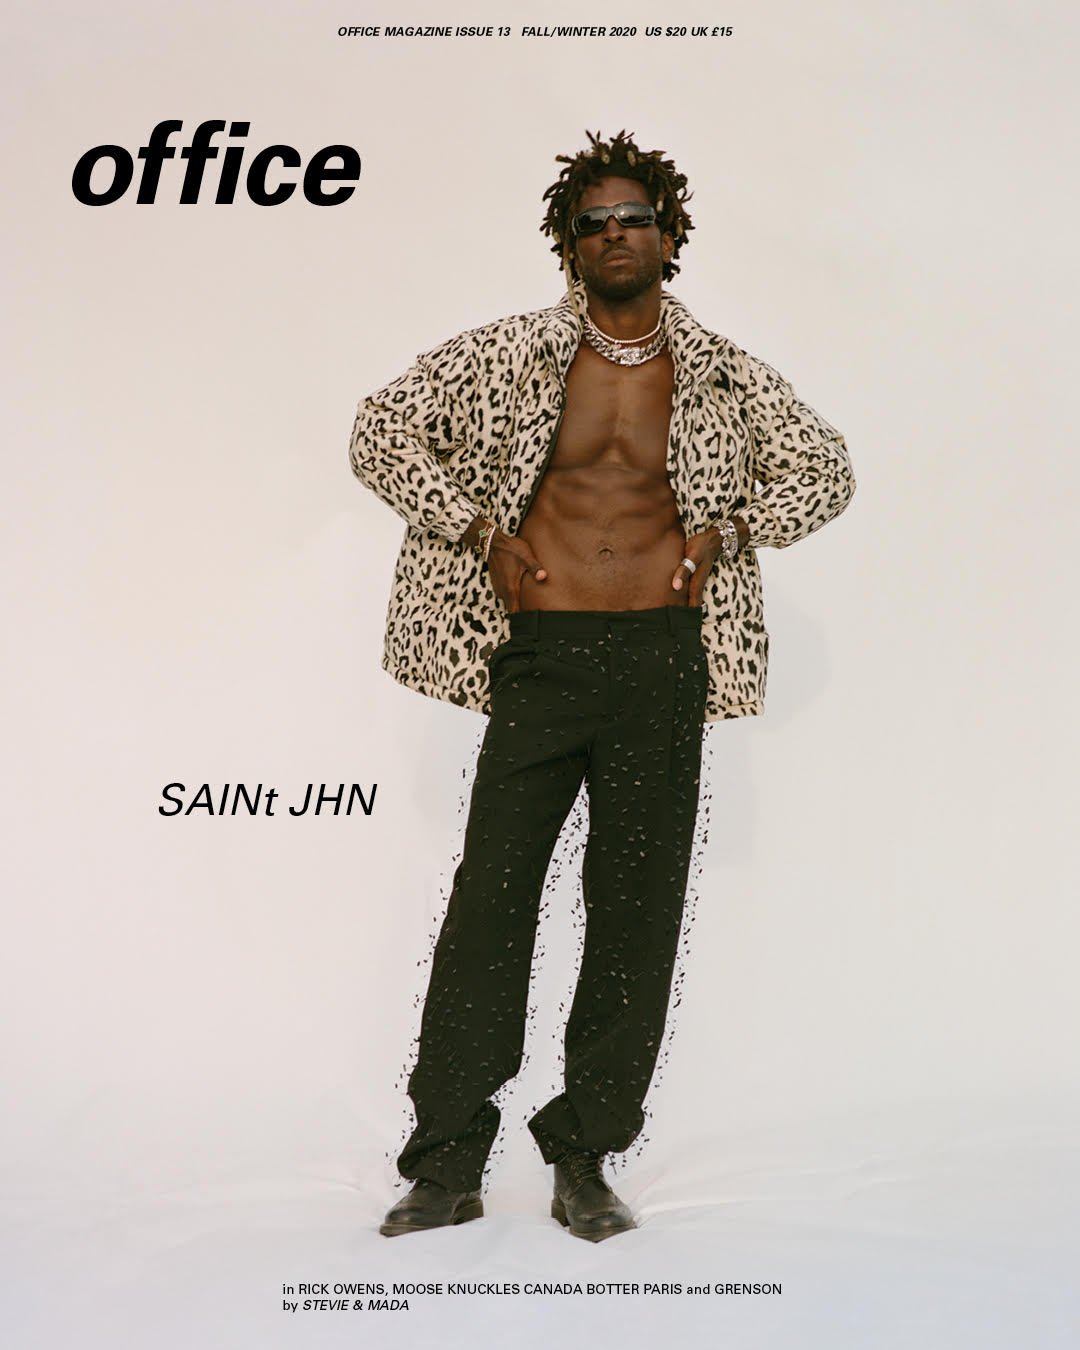  office Issue 13 